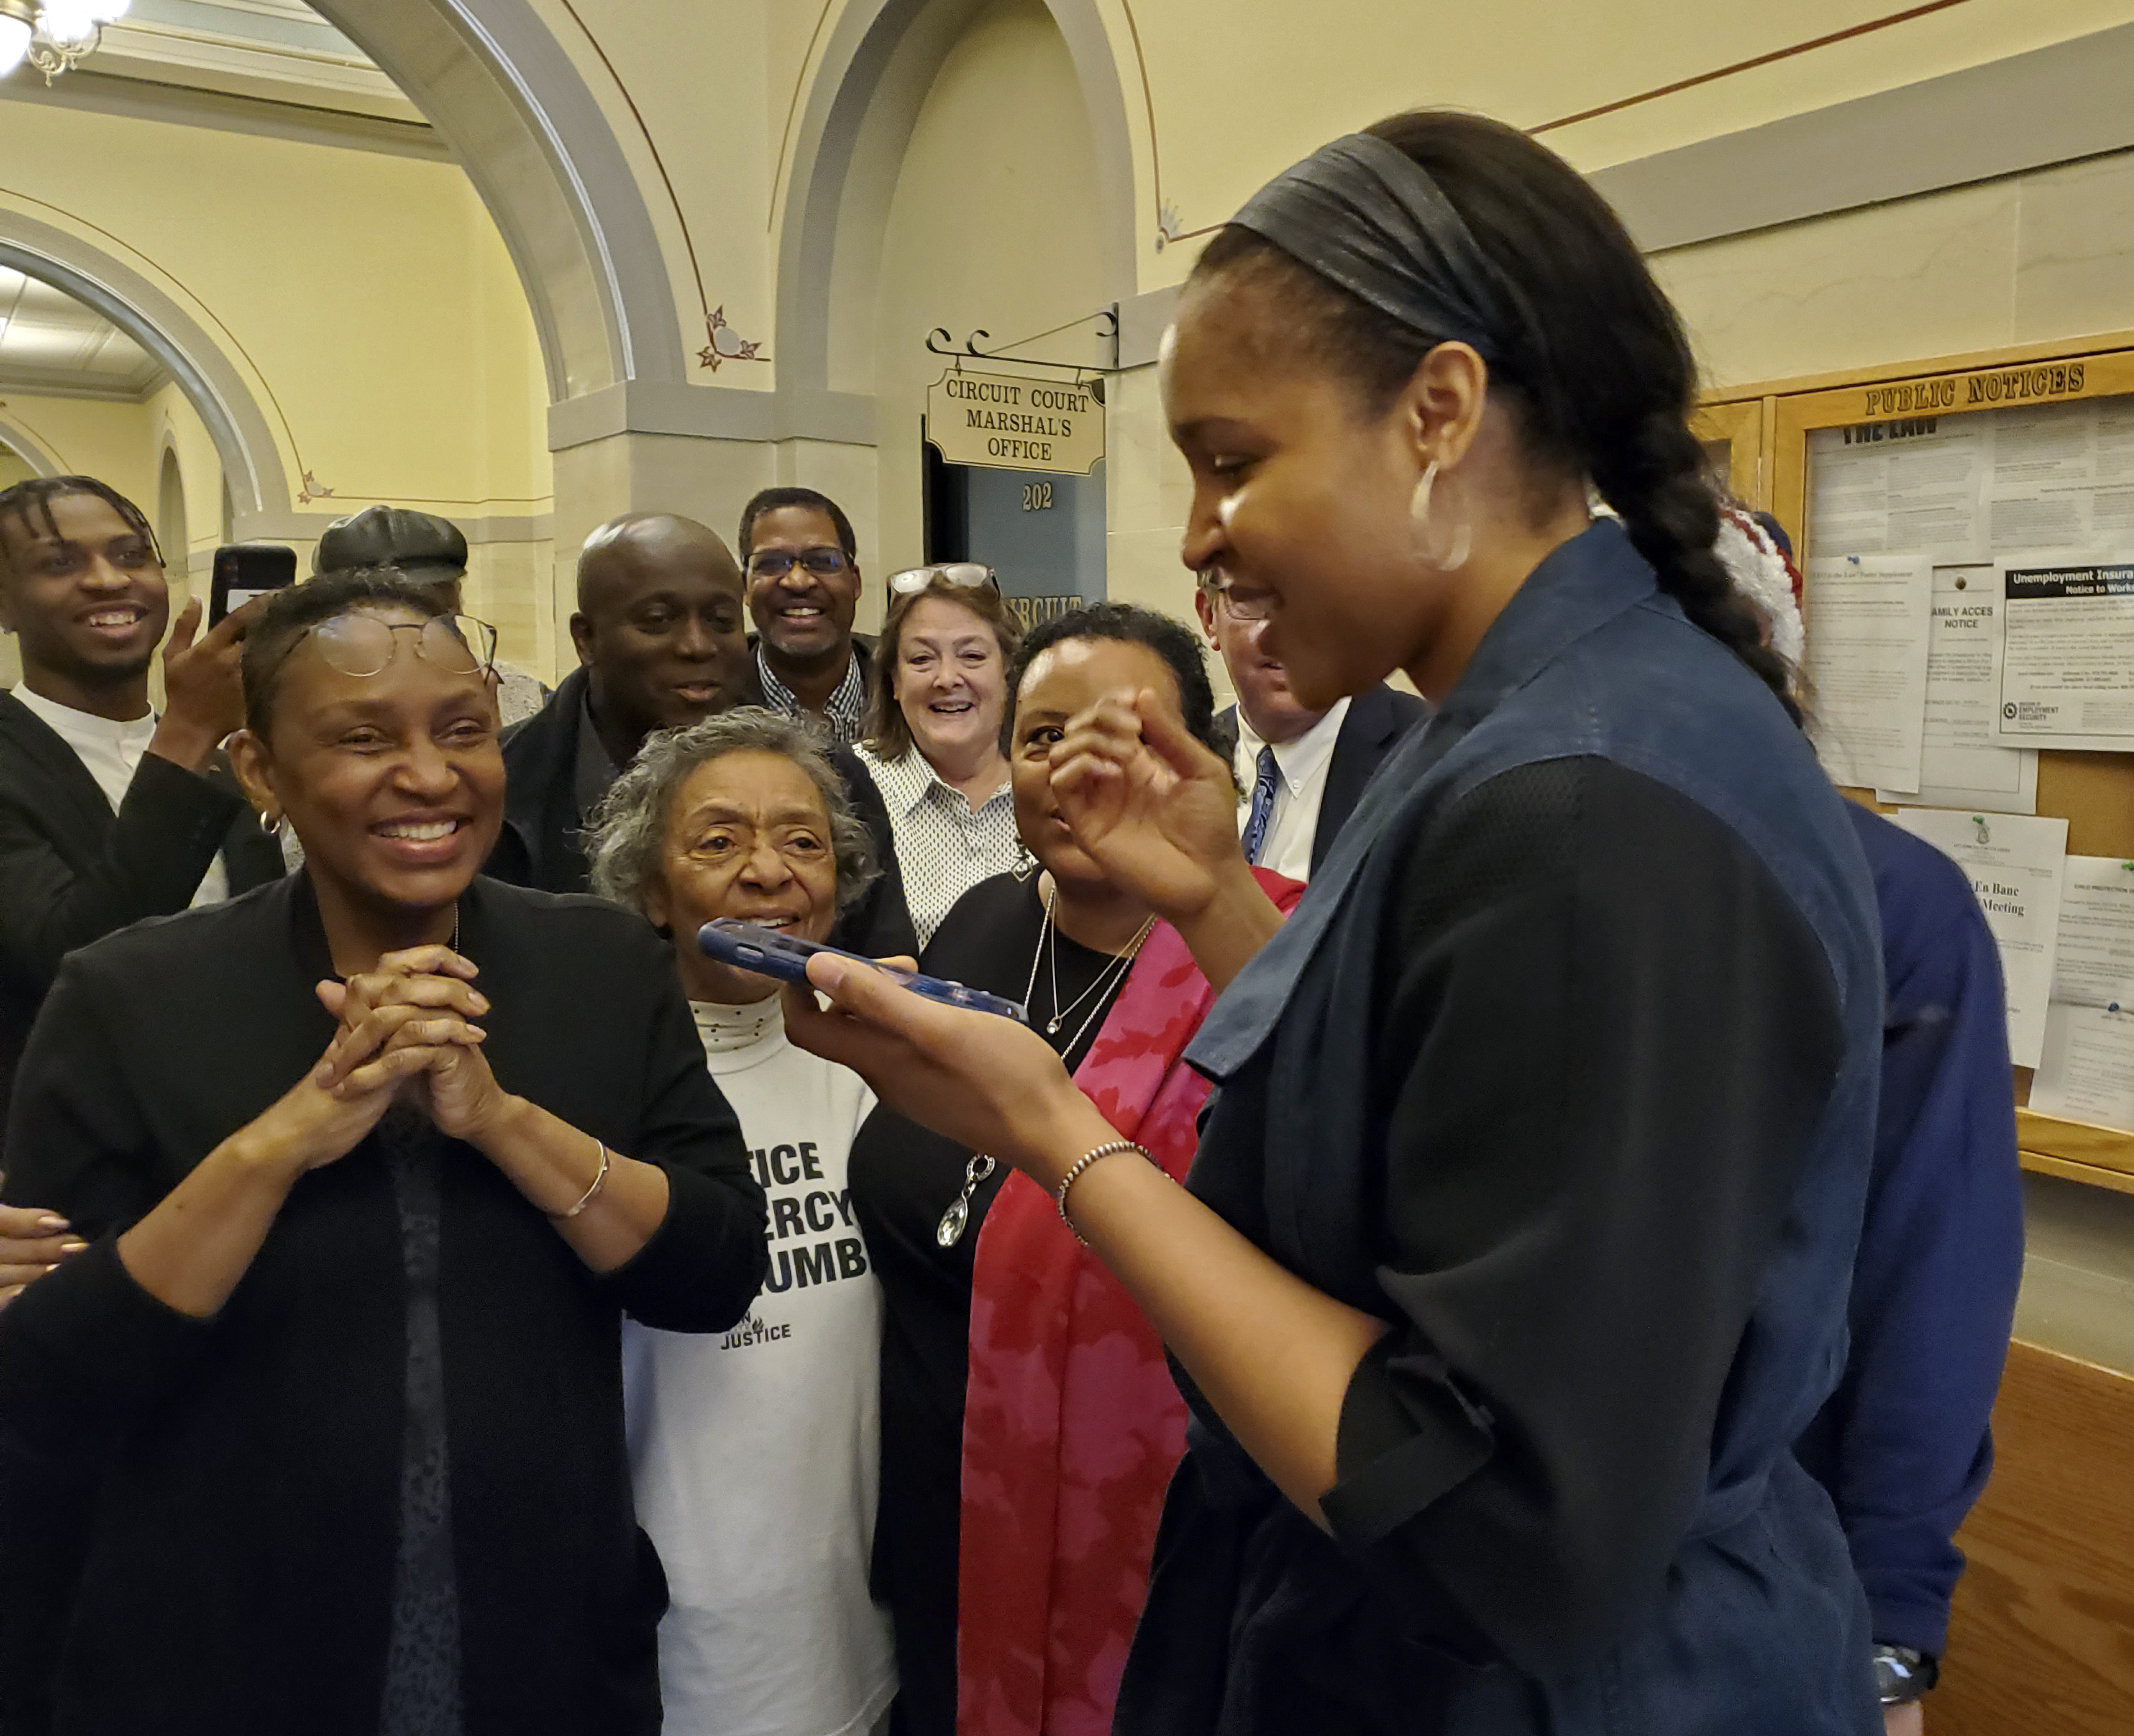 Jefferson City, Mo., native and WNBA star Maya Moore, right, calls Jonathan Irons as supporters react Monday, March 9, 2020, in Jefferson City after Cole County Judge Dan Green overturned Irons' convictions in a 1997 burglary and assault case. Moore, a family friend, had supported Irons, sharing his story on a national basis. (Jeff Haldiman/The Jefferson City News-Tribune via AP)